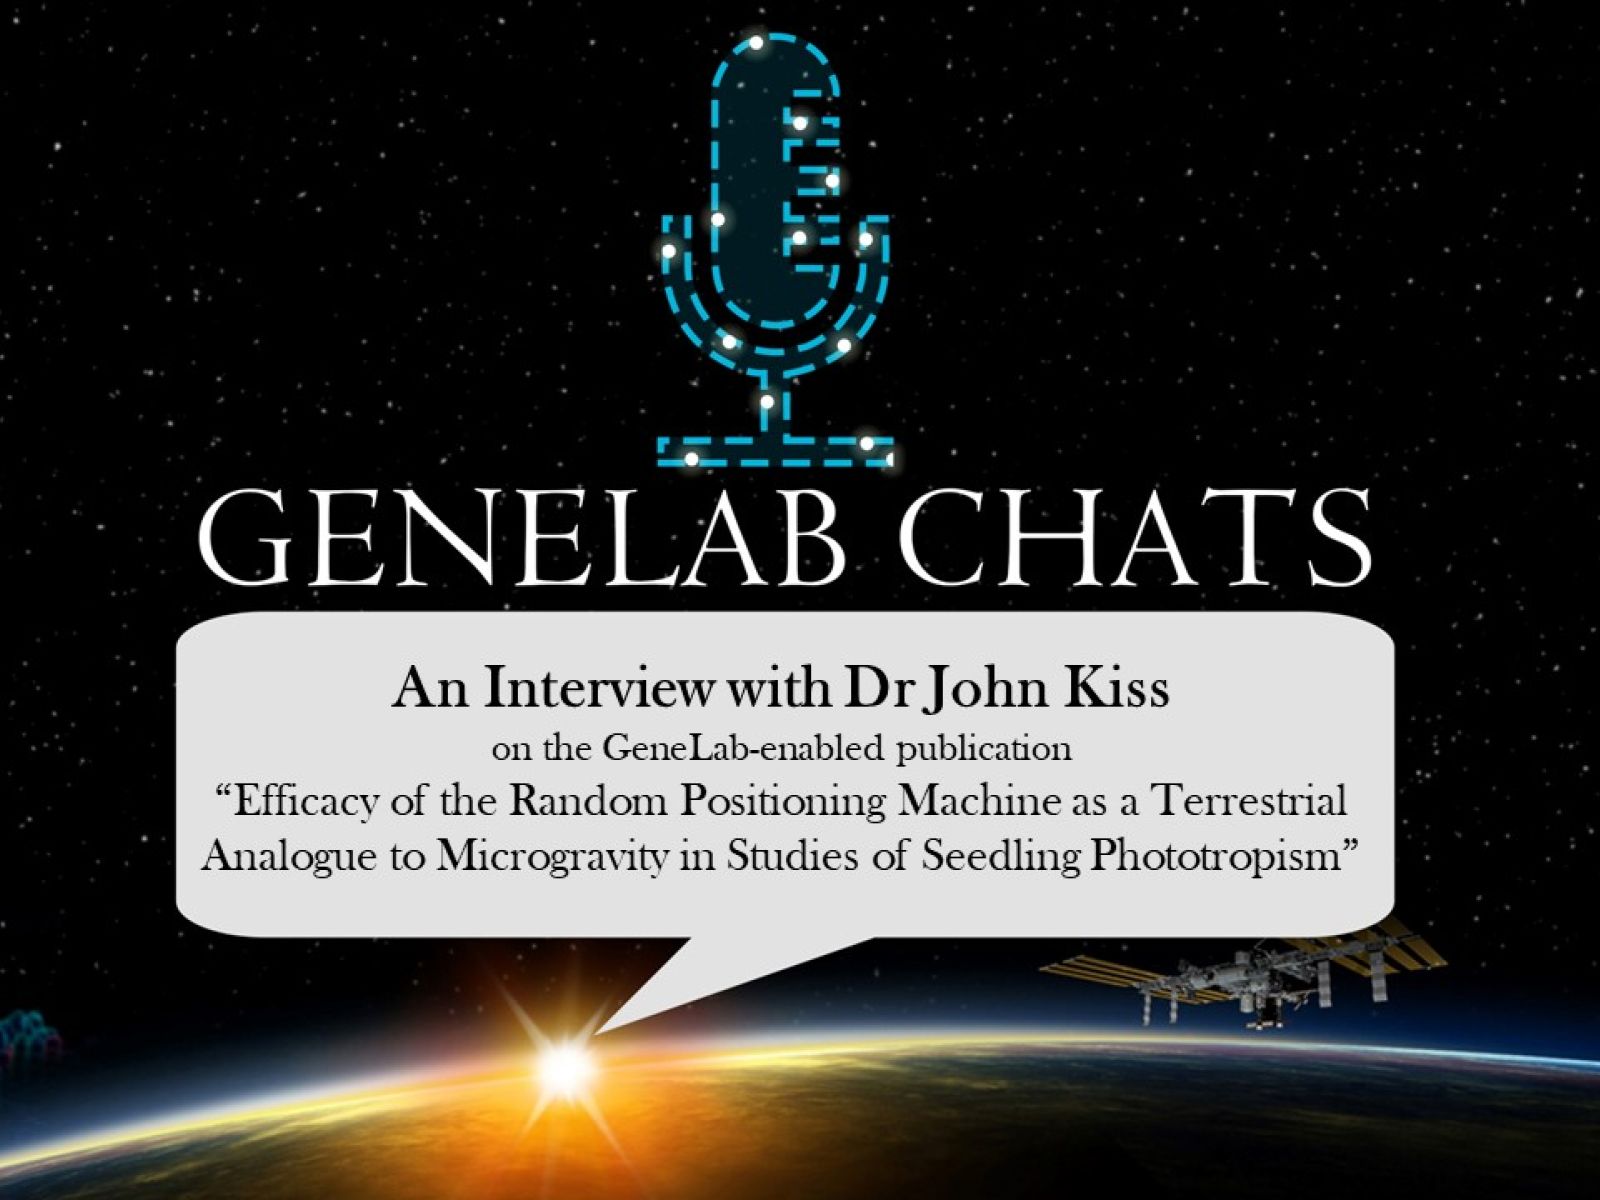 Title slide for GeneLab Chats interview with Dr John Z Kiss